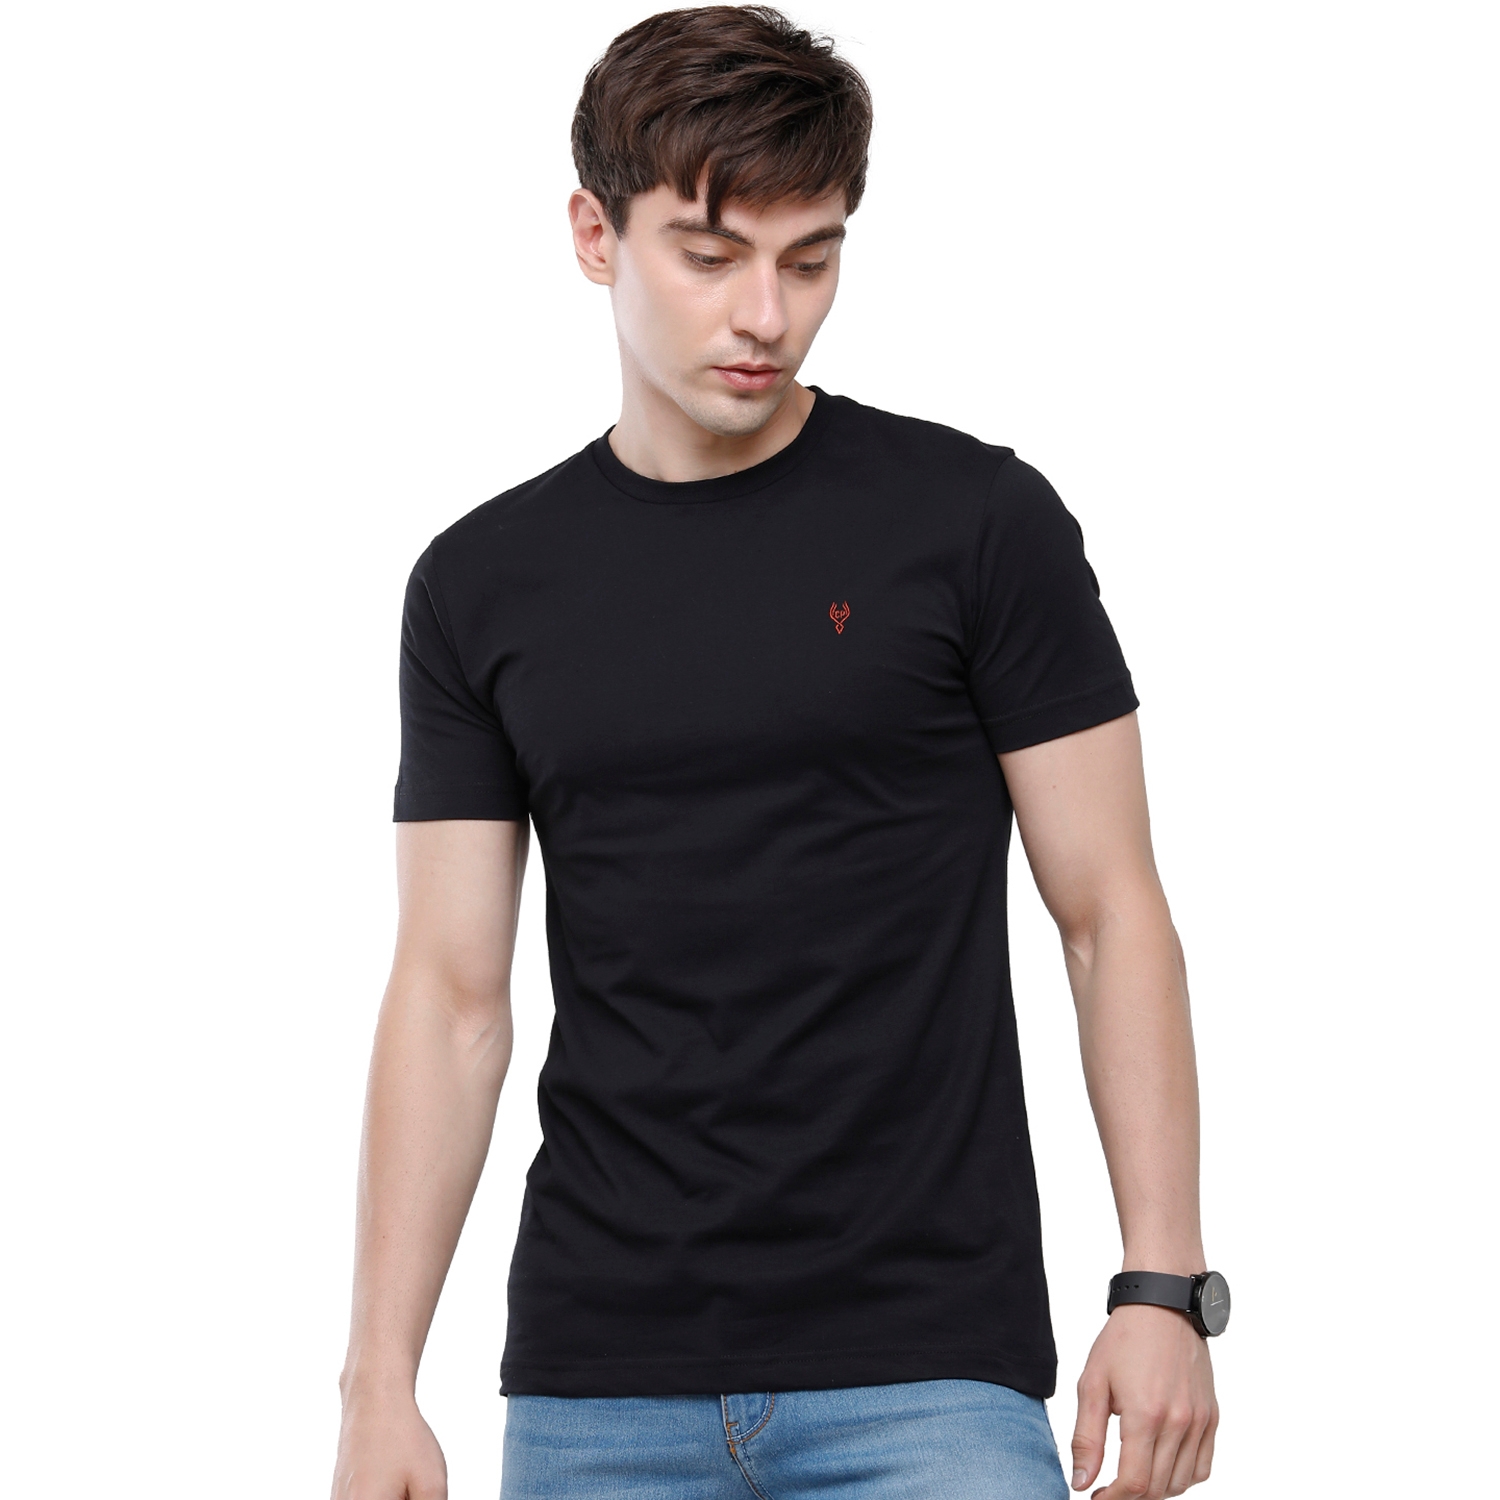 Classic Polo | Classic Polo Mens 100% Cotton Solid Half Sleeve Round Neck T-Shirt - Black (NOS-KORE-09 SF C)